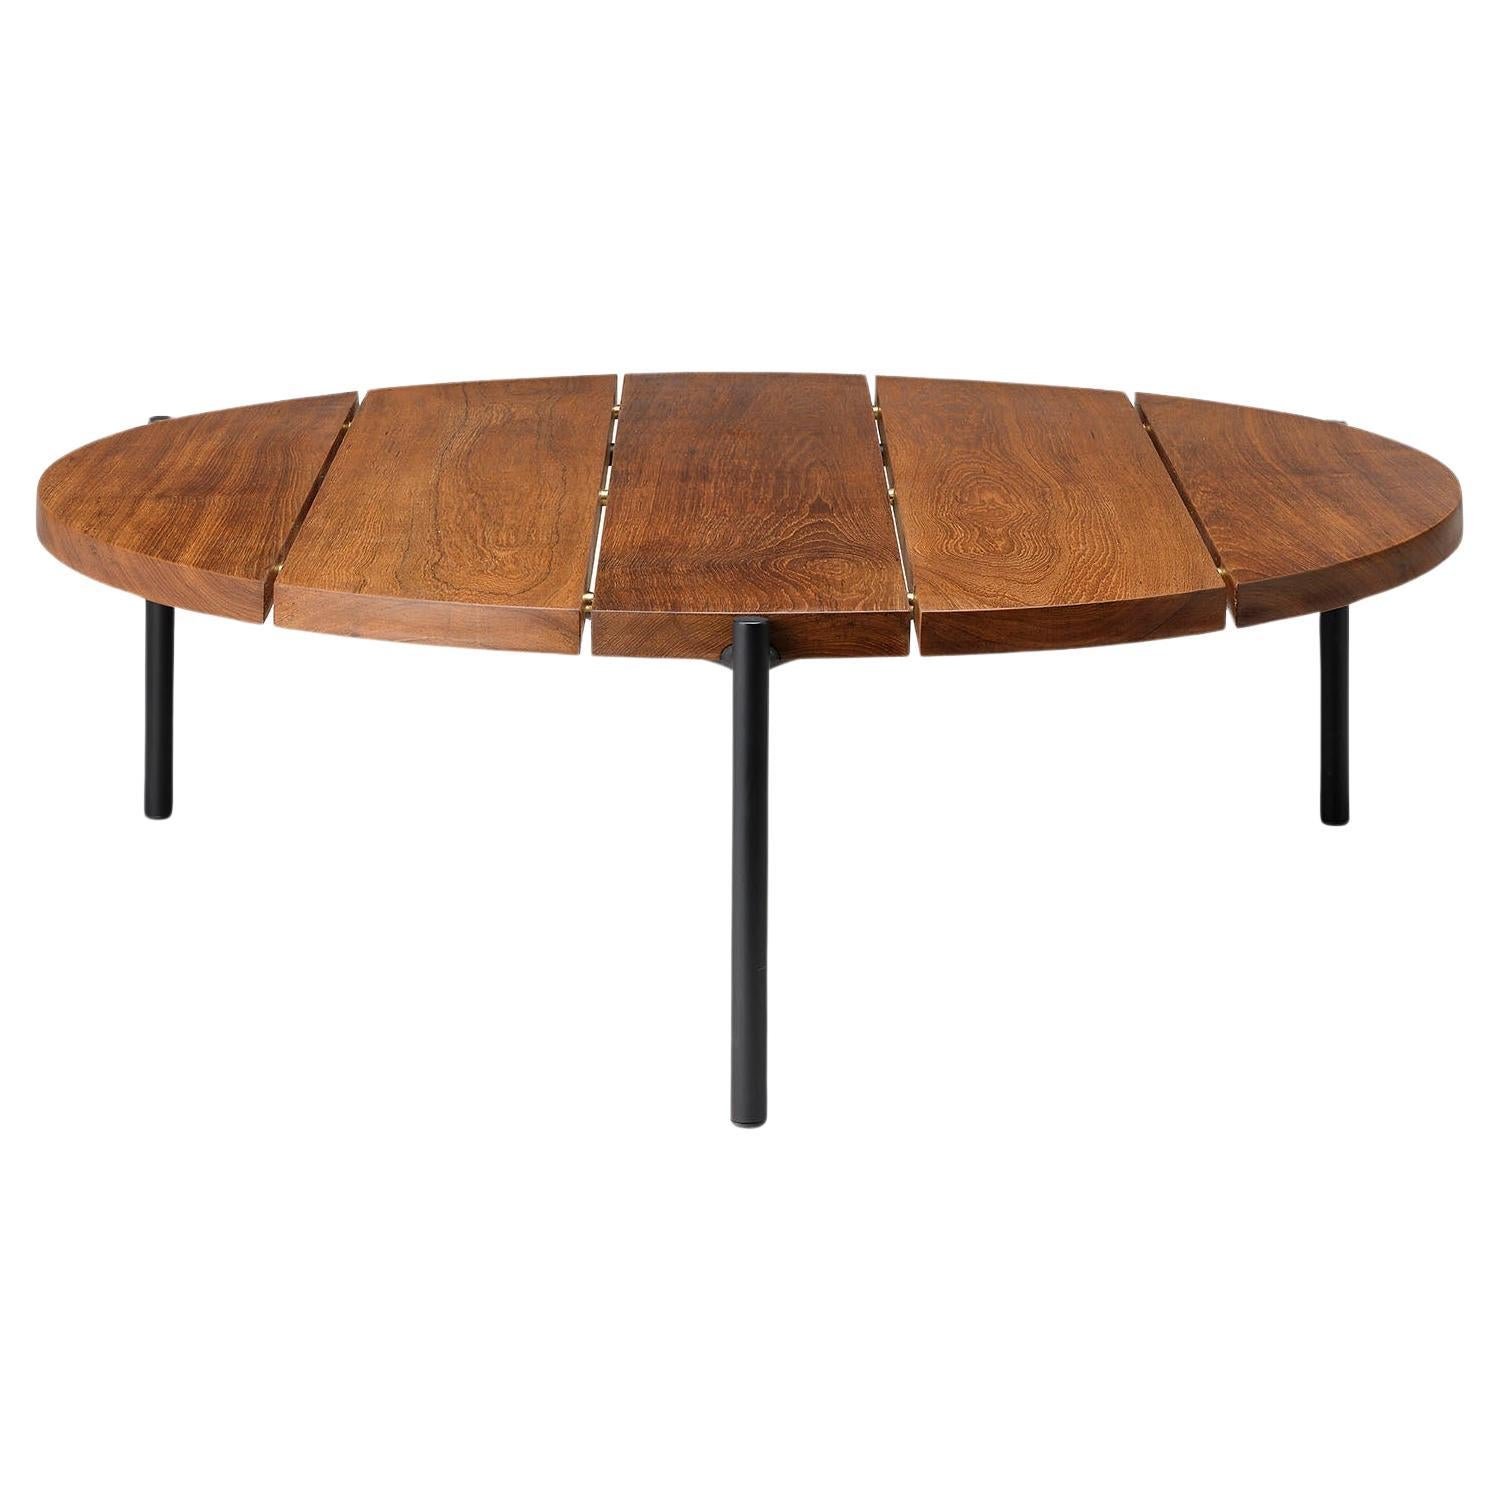 Ten10 Madeira Line Round Coffee Table Solid Plank Teak Top Stainless Steel Base 